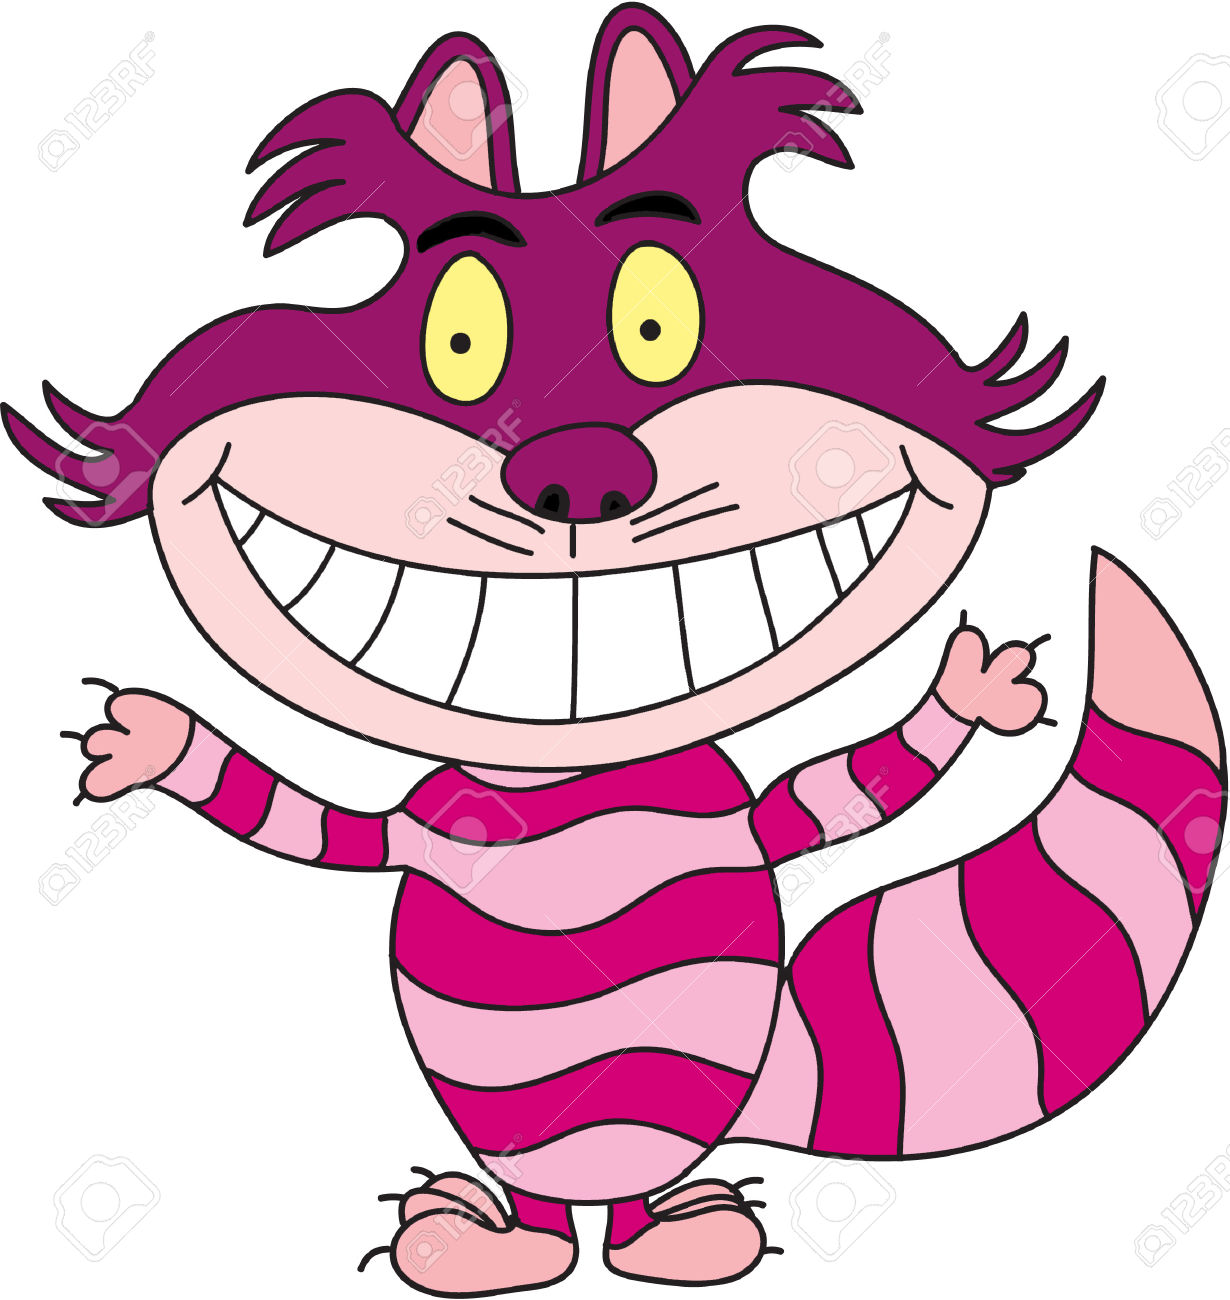 Cheshire Cat clipart #4, Download drawings